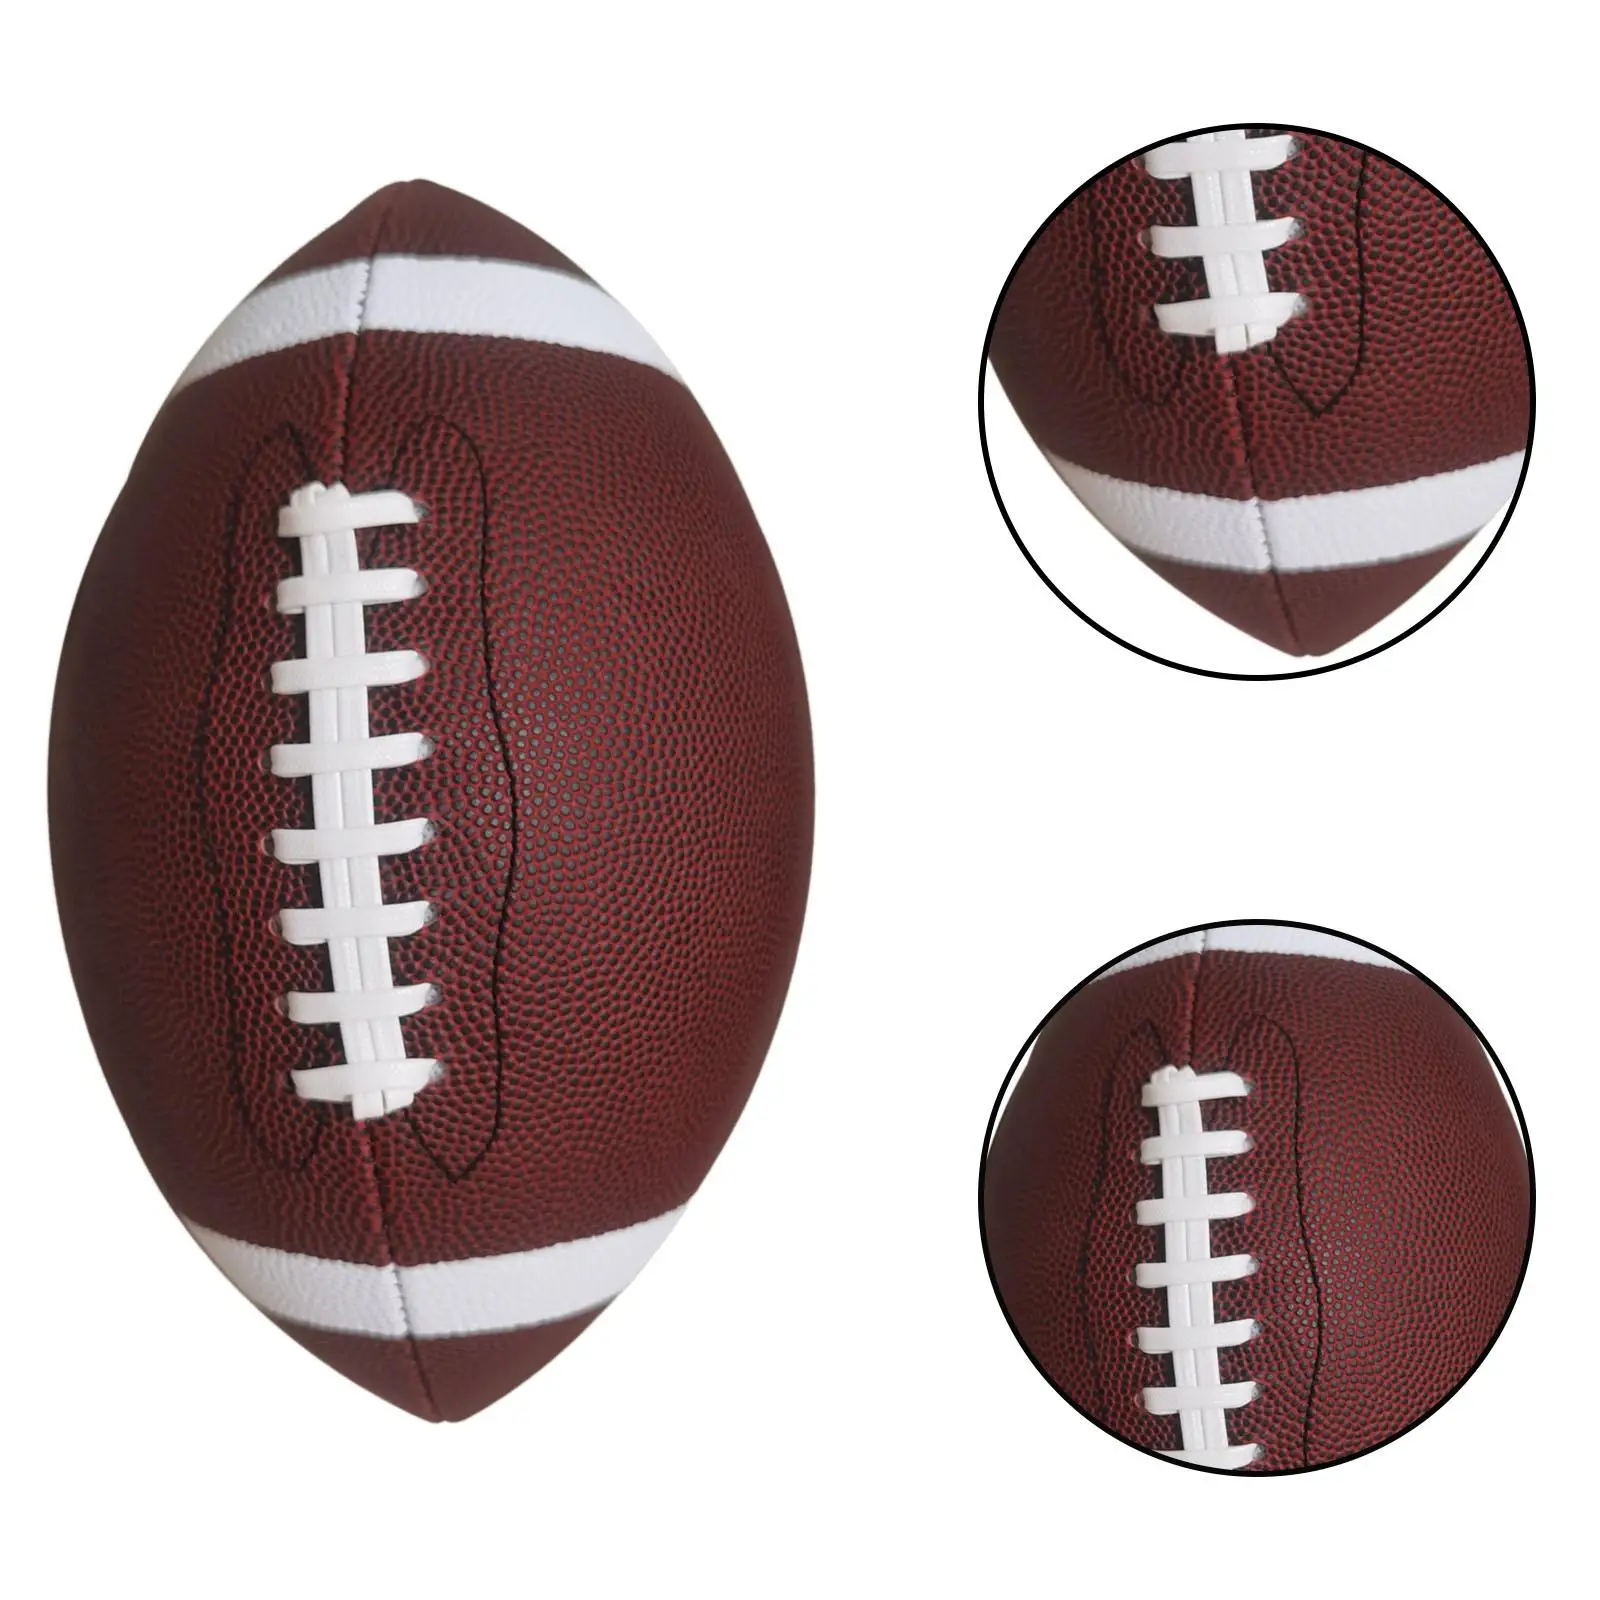 Official Football Accessories American Football for Game Playing Sports